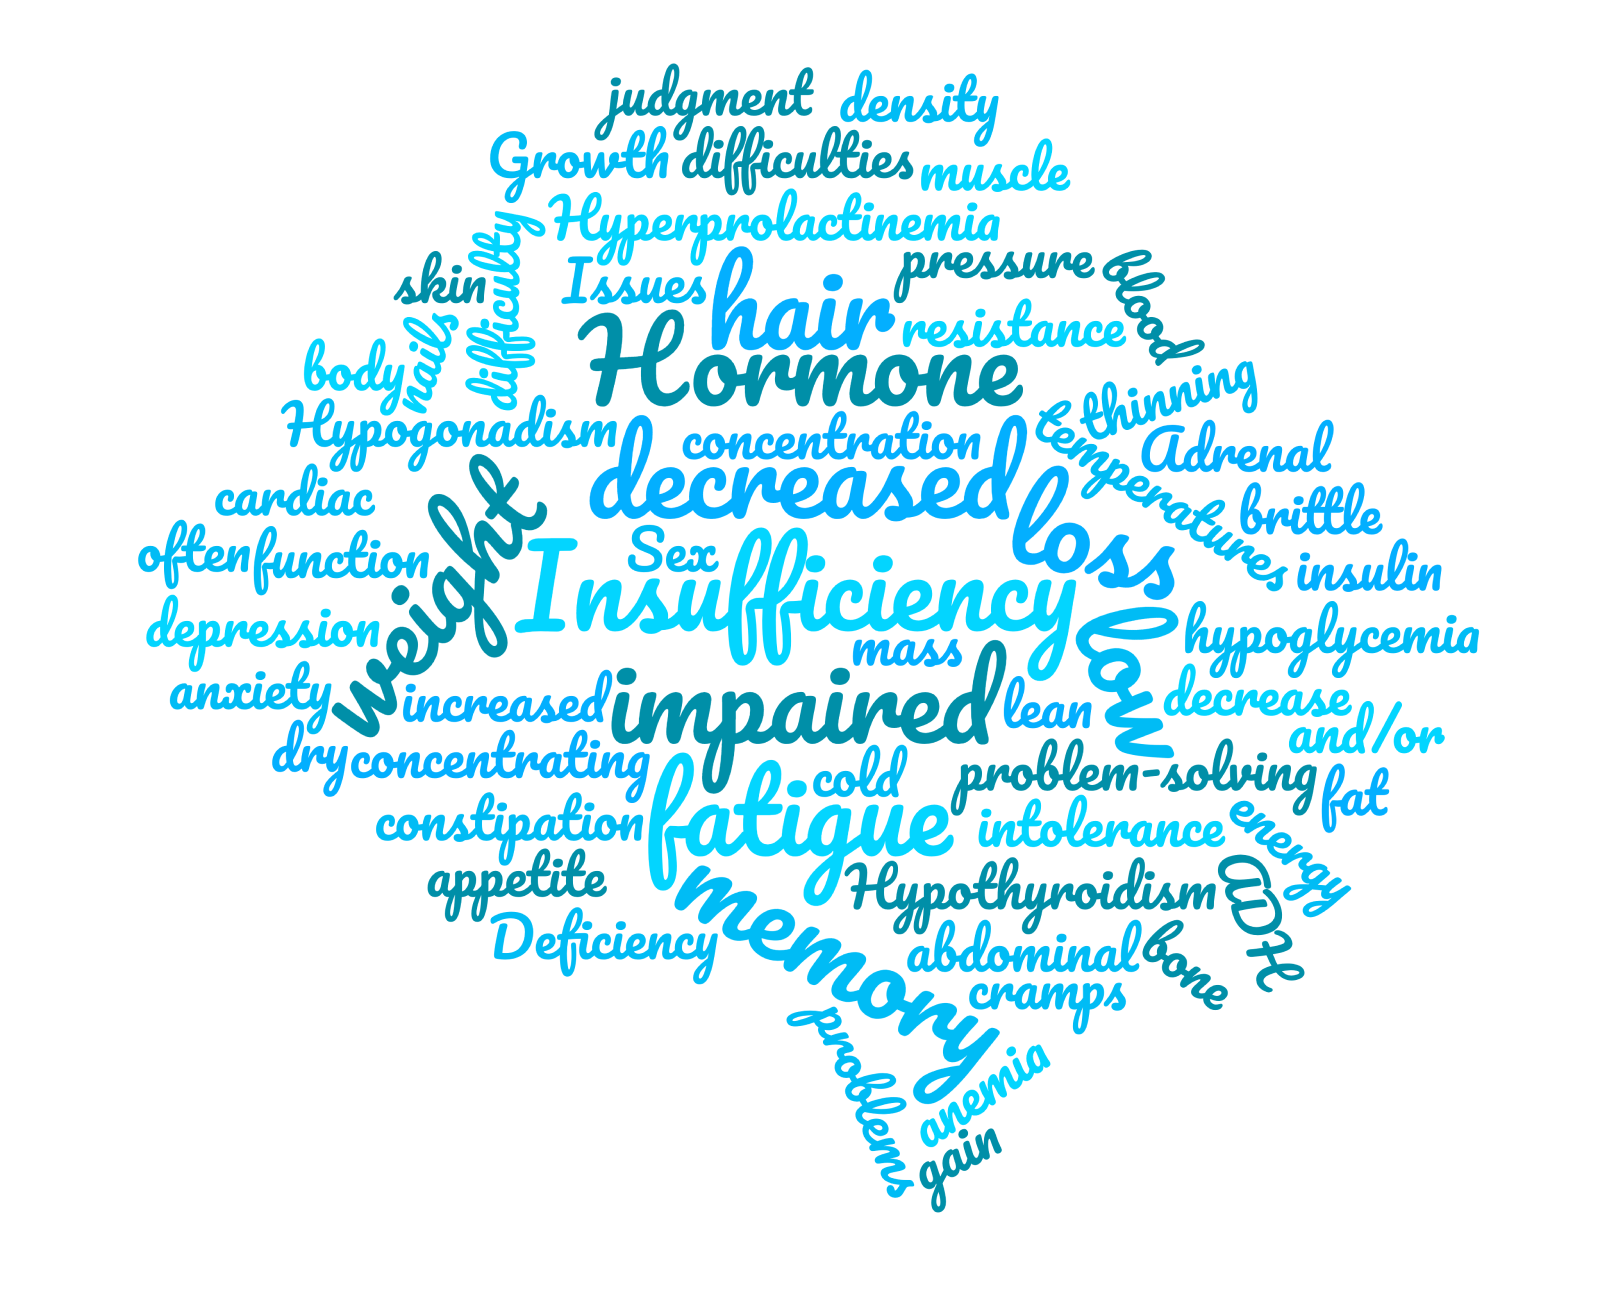 A wordcloud with all of the common words associated with hormone dysregulation.